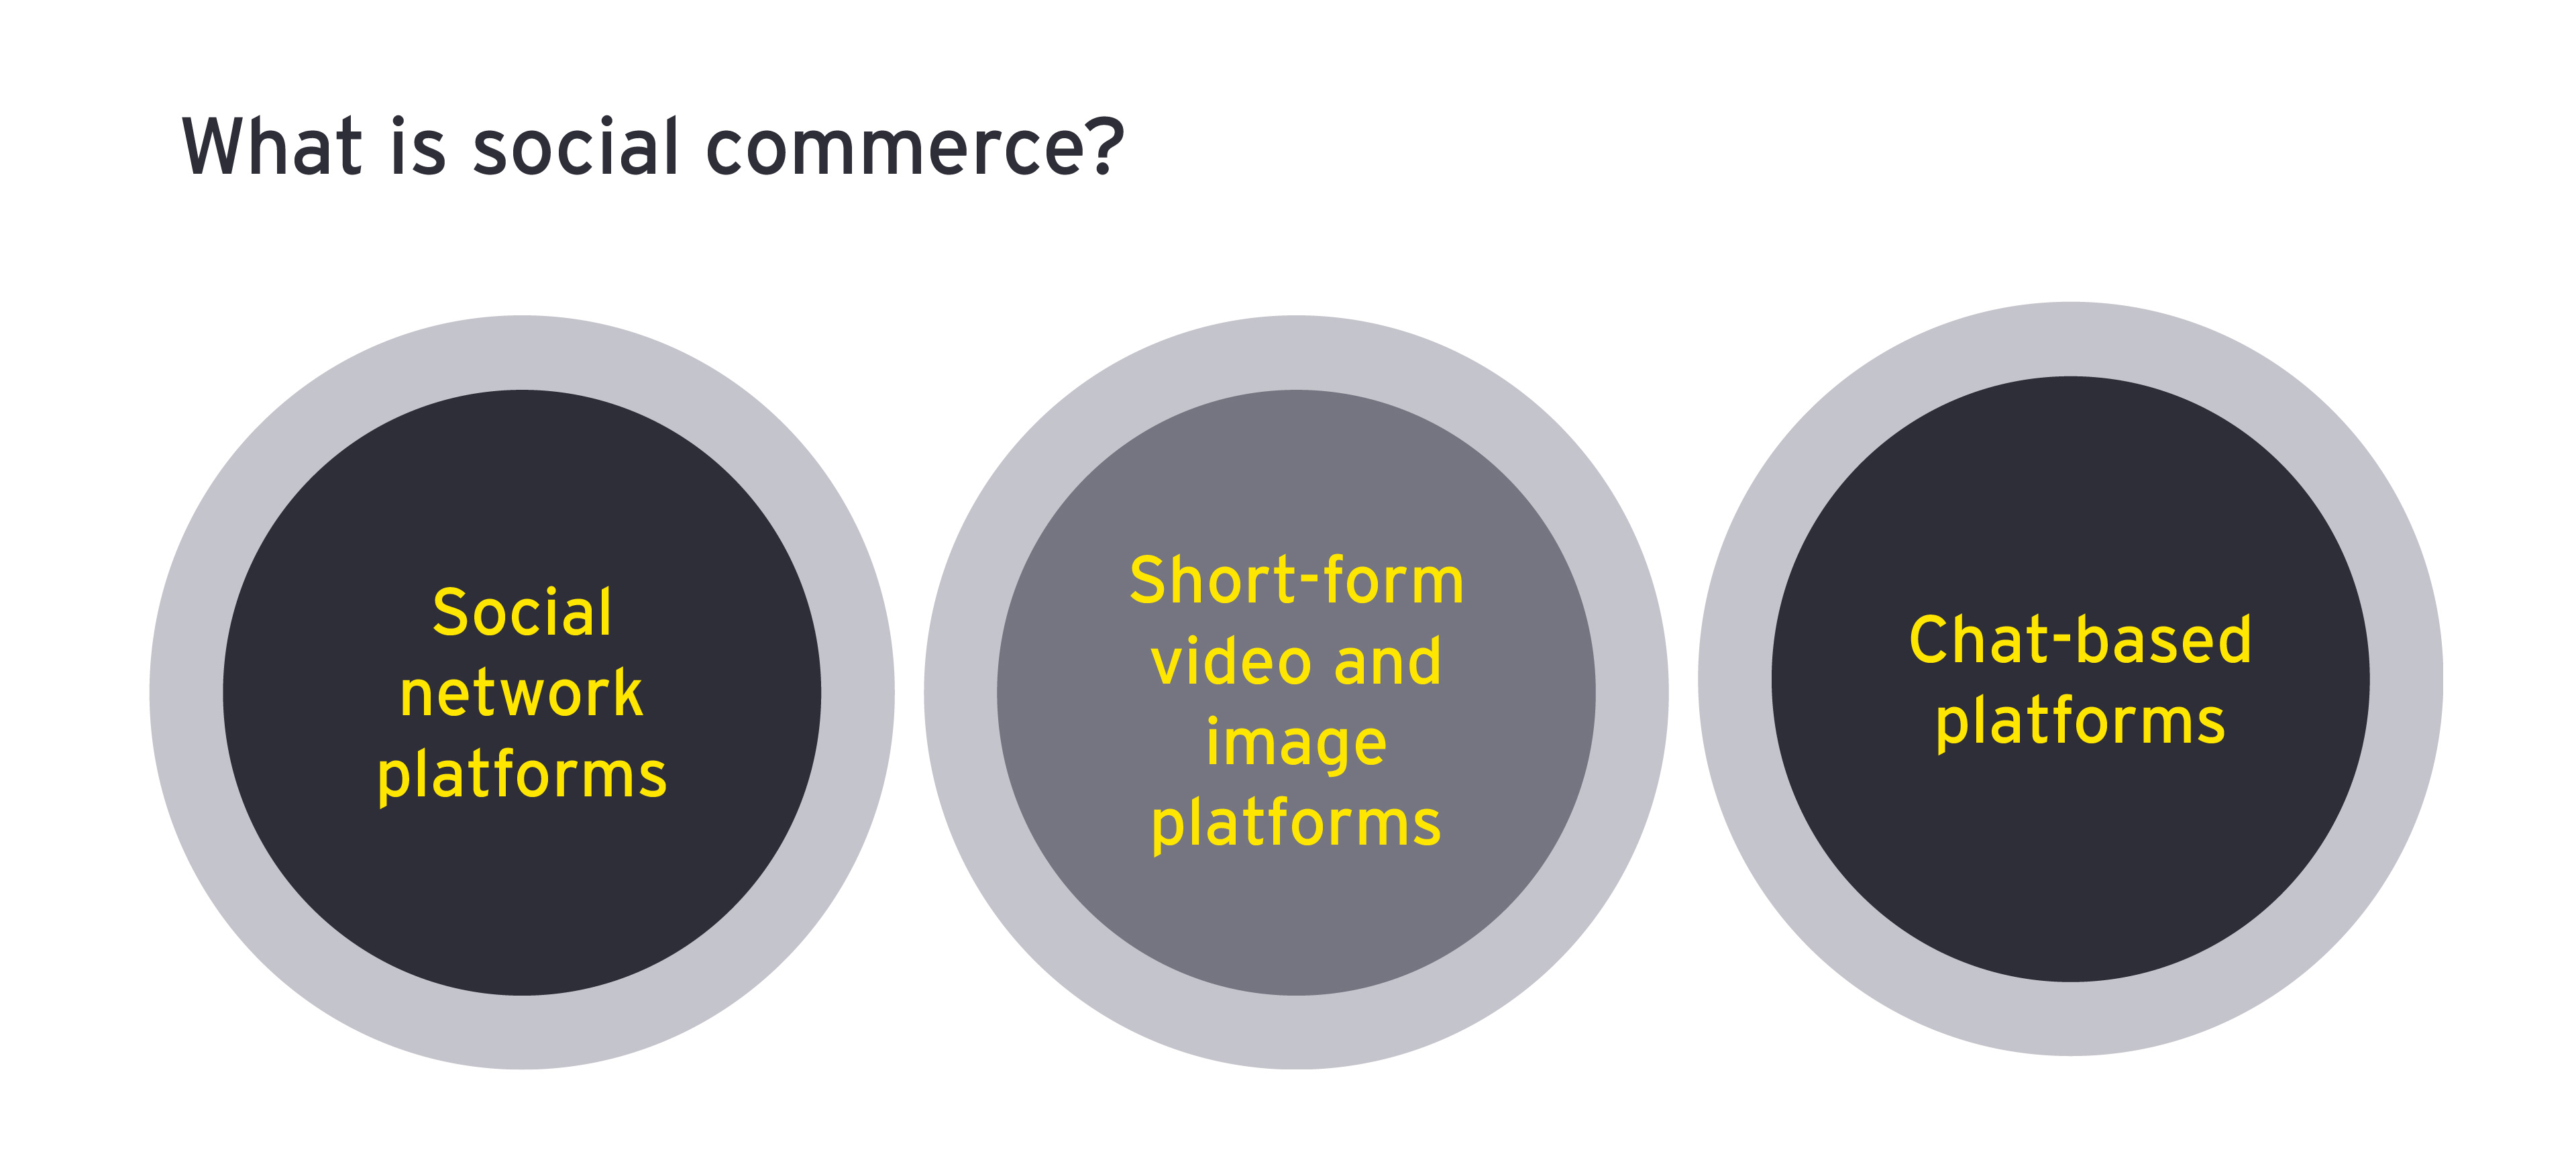 What is social commerce